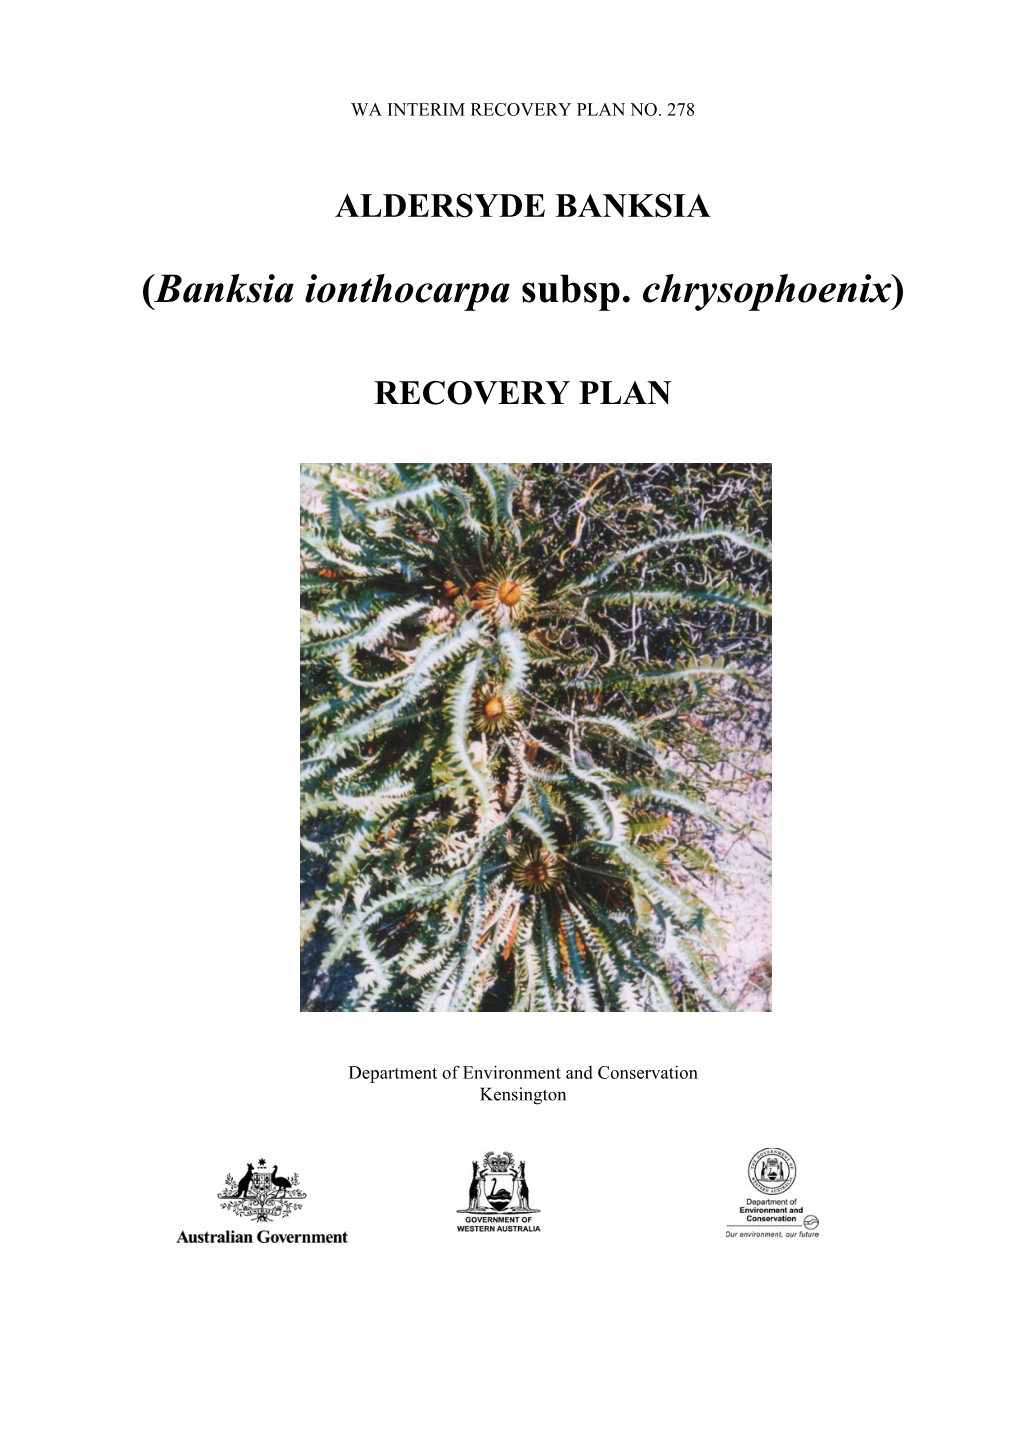 (Banksia Ionthocarpa Subsp. Chrysophoenix) RECOVERY PLAN